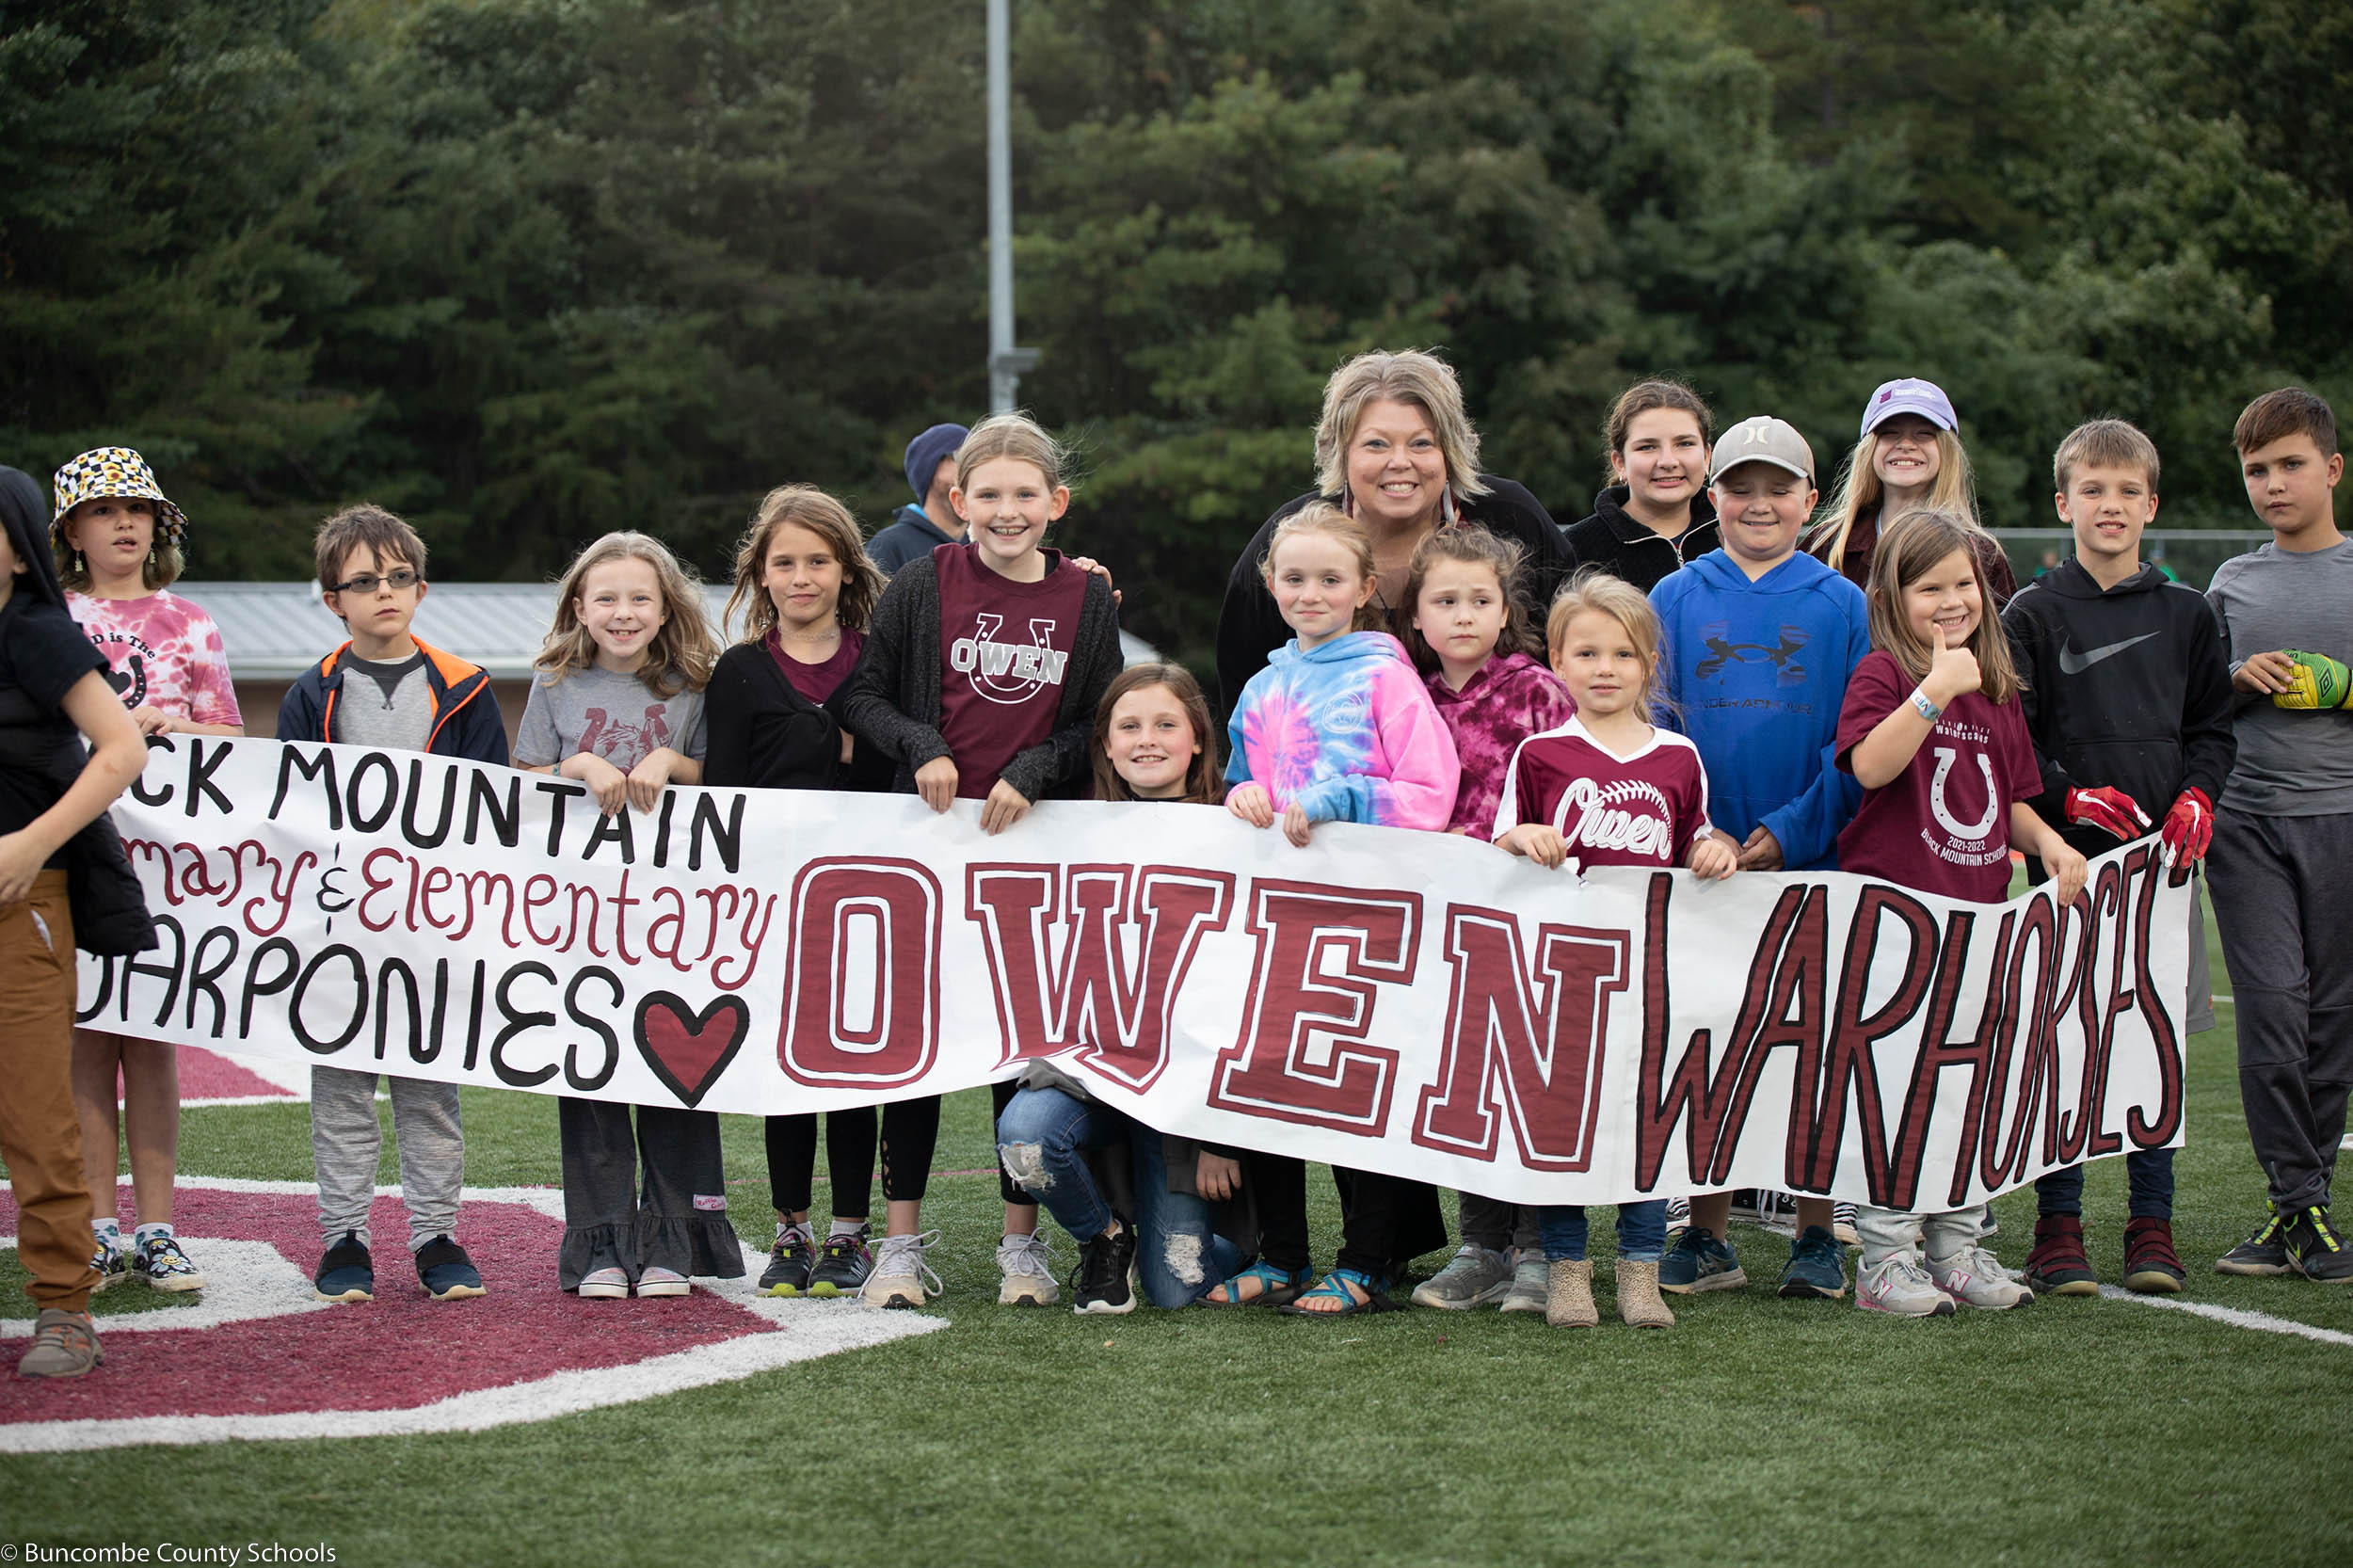 Principal Kelly Owen with students at an Owen High School football game.